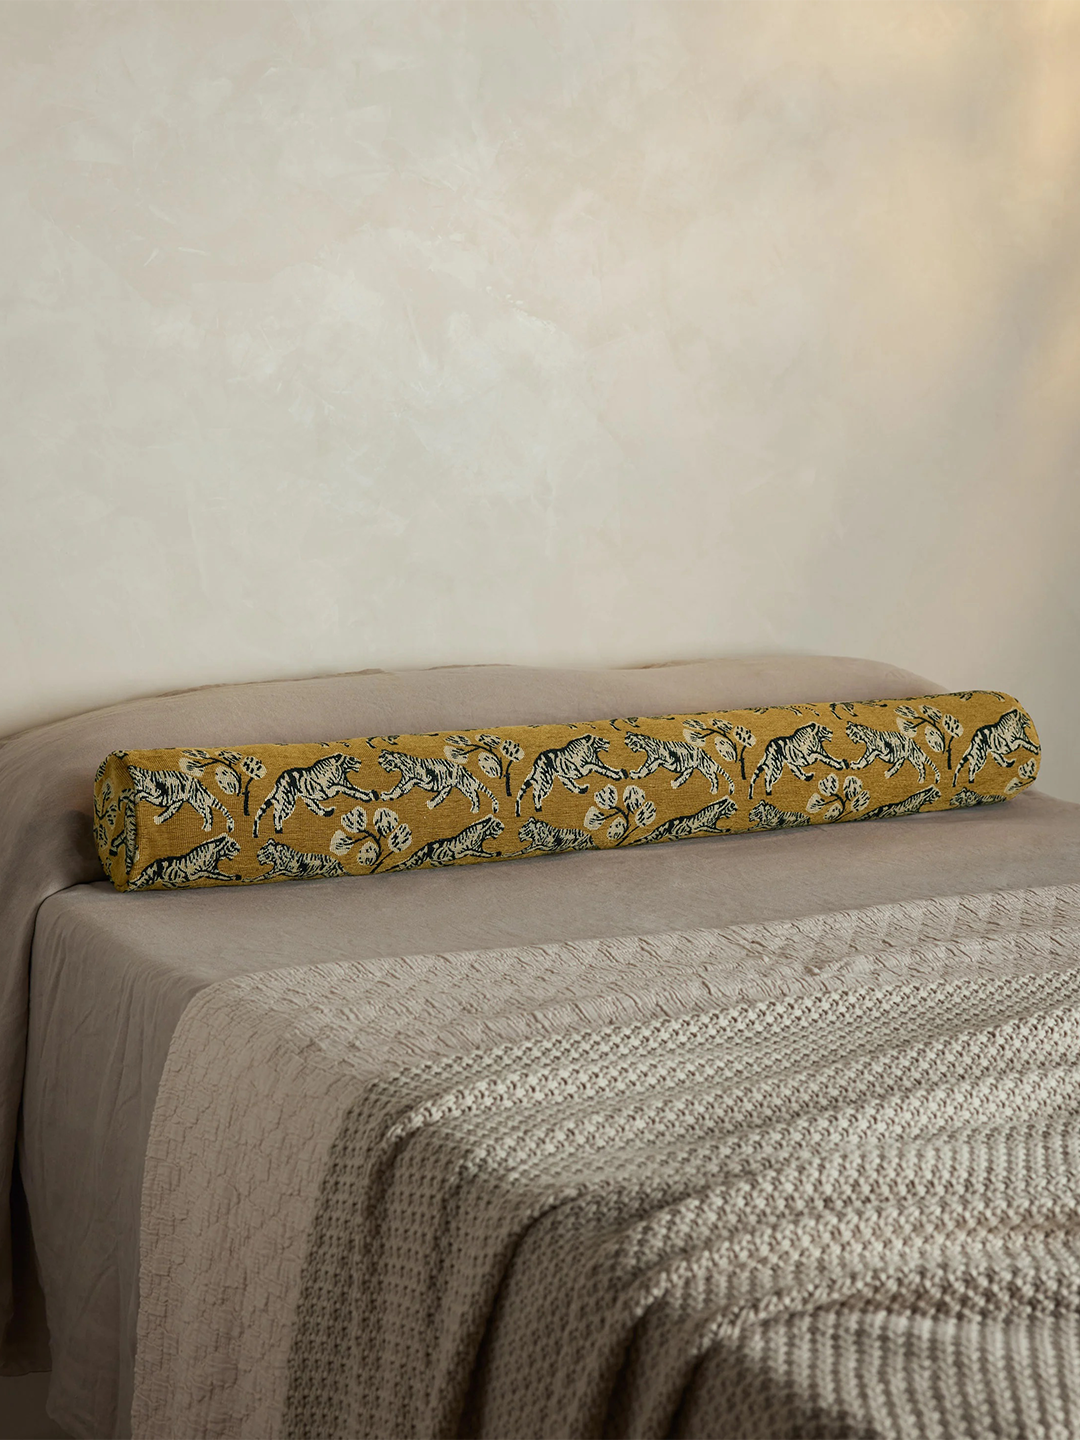 tiger fabric on bolster pillow on bed